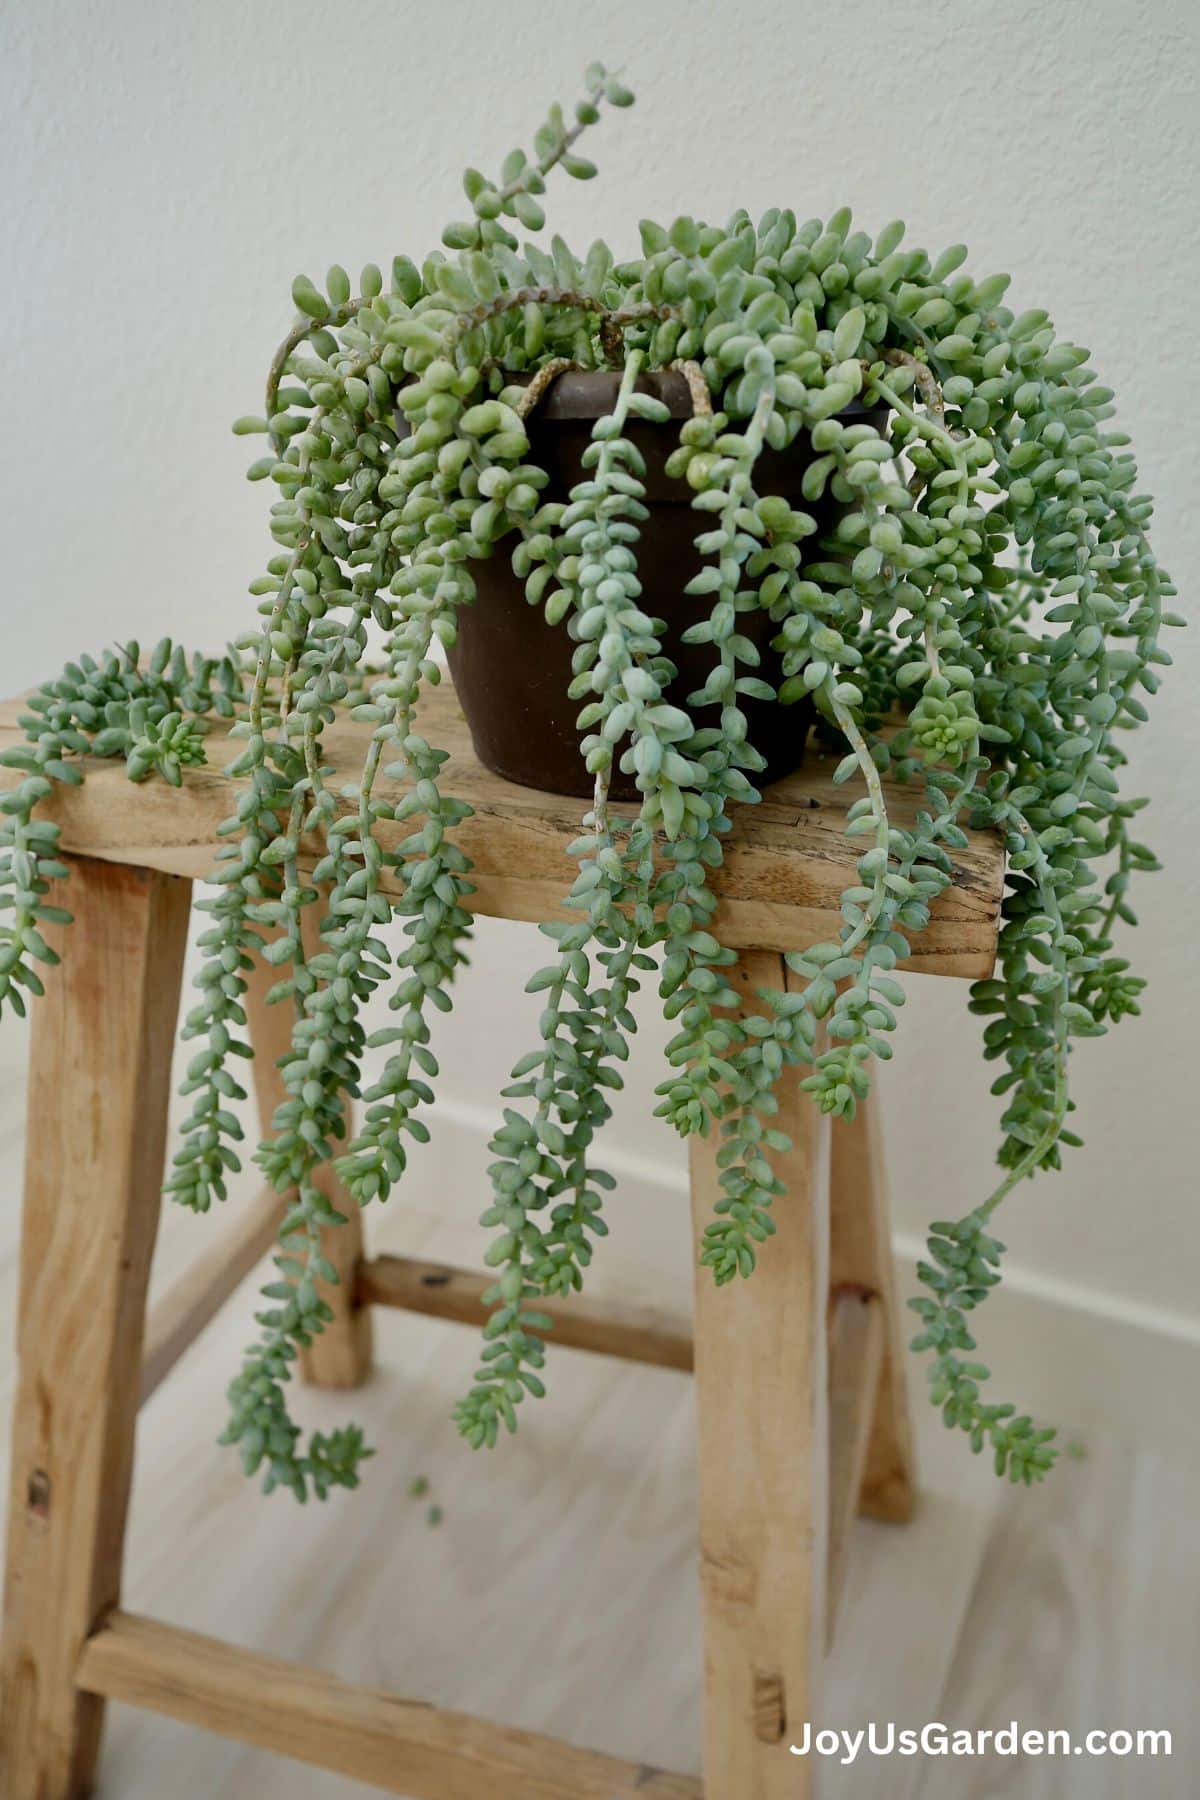 Donkey tail cactus growing indoors in wooden stools, long trails hanging over the plastic pot.